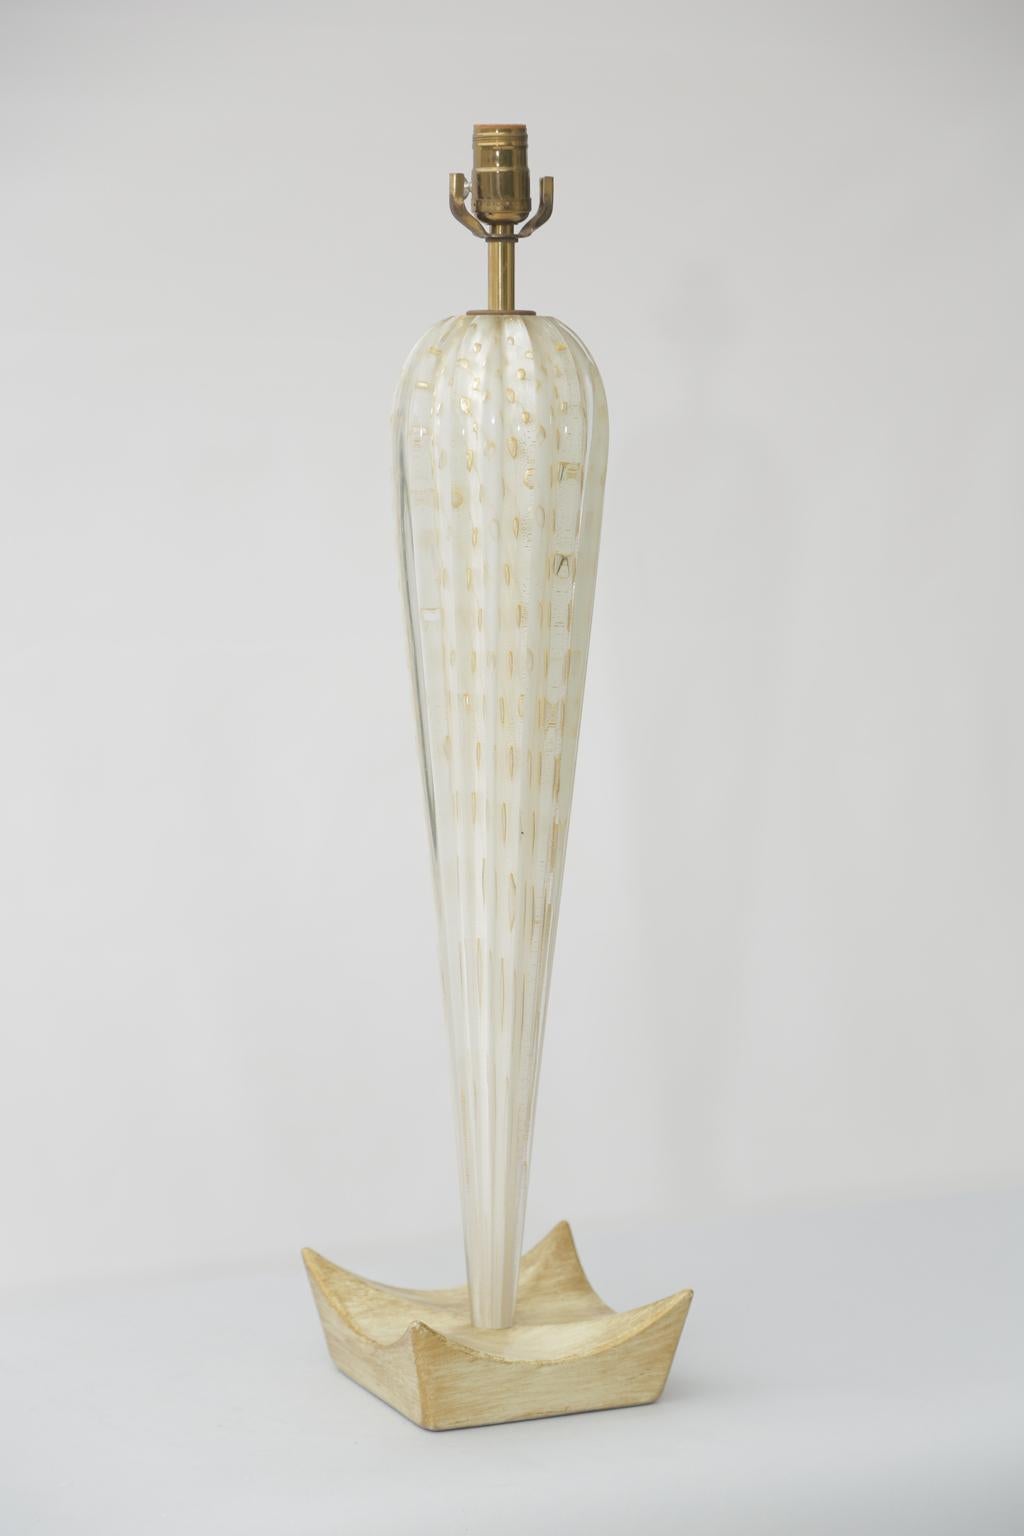 Hand-blown murano glass table lamp, attributed to Barovier e Toso, having a reeded, inverted-teardrop form, gold flecks and bubbles encased in clear glass over opaque white glass, on a concave wooden base. 

Stock ID: D3163.